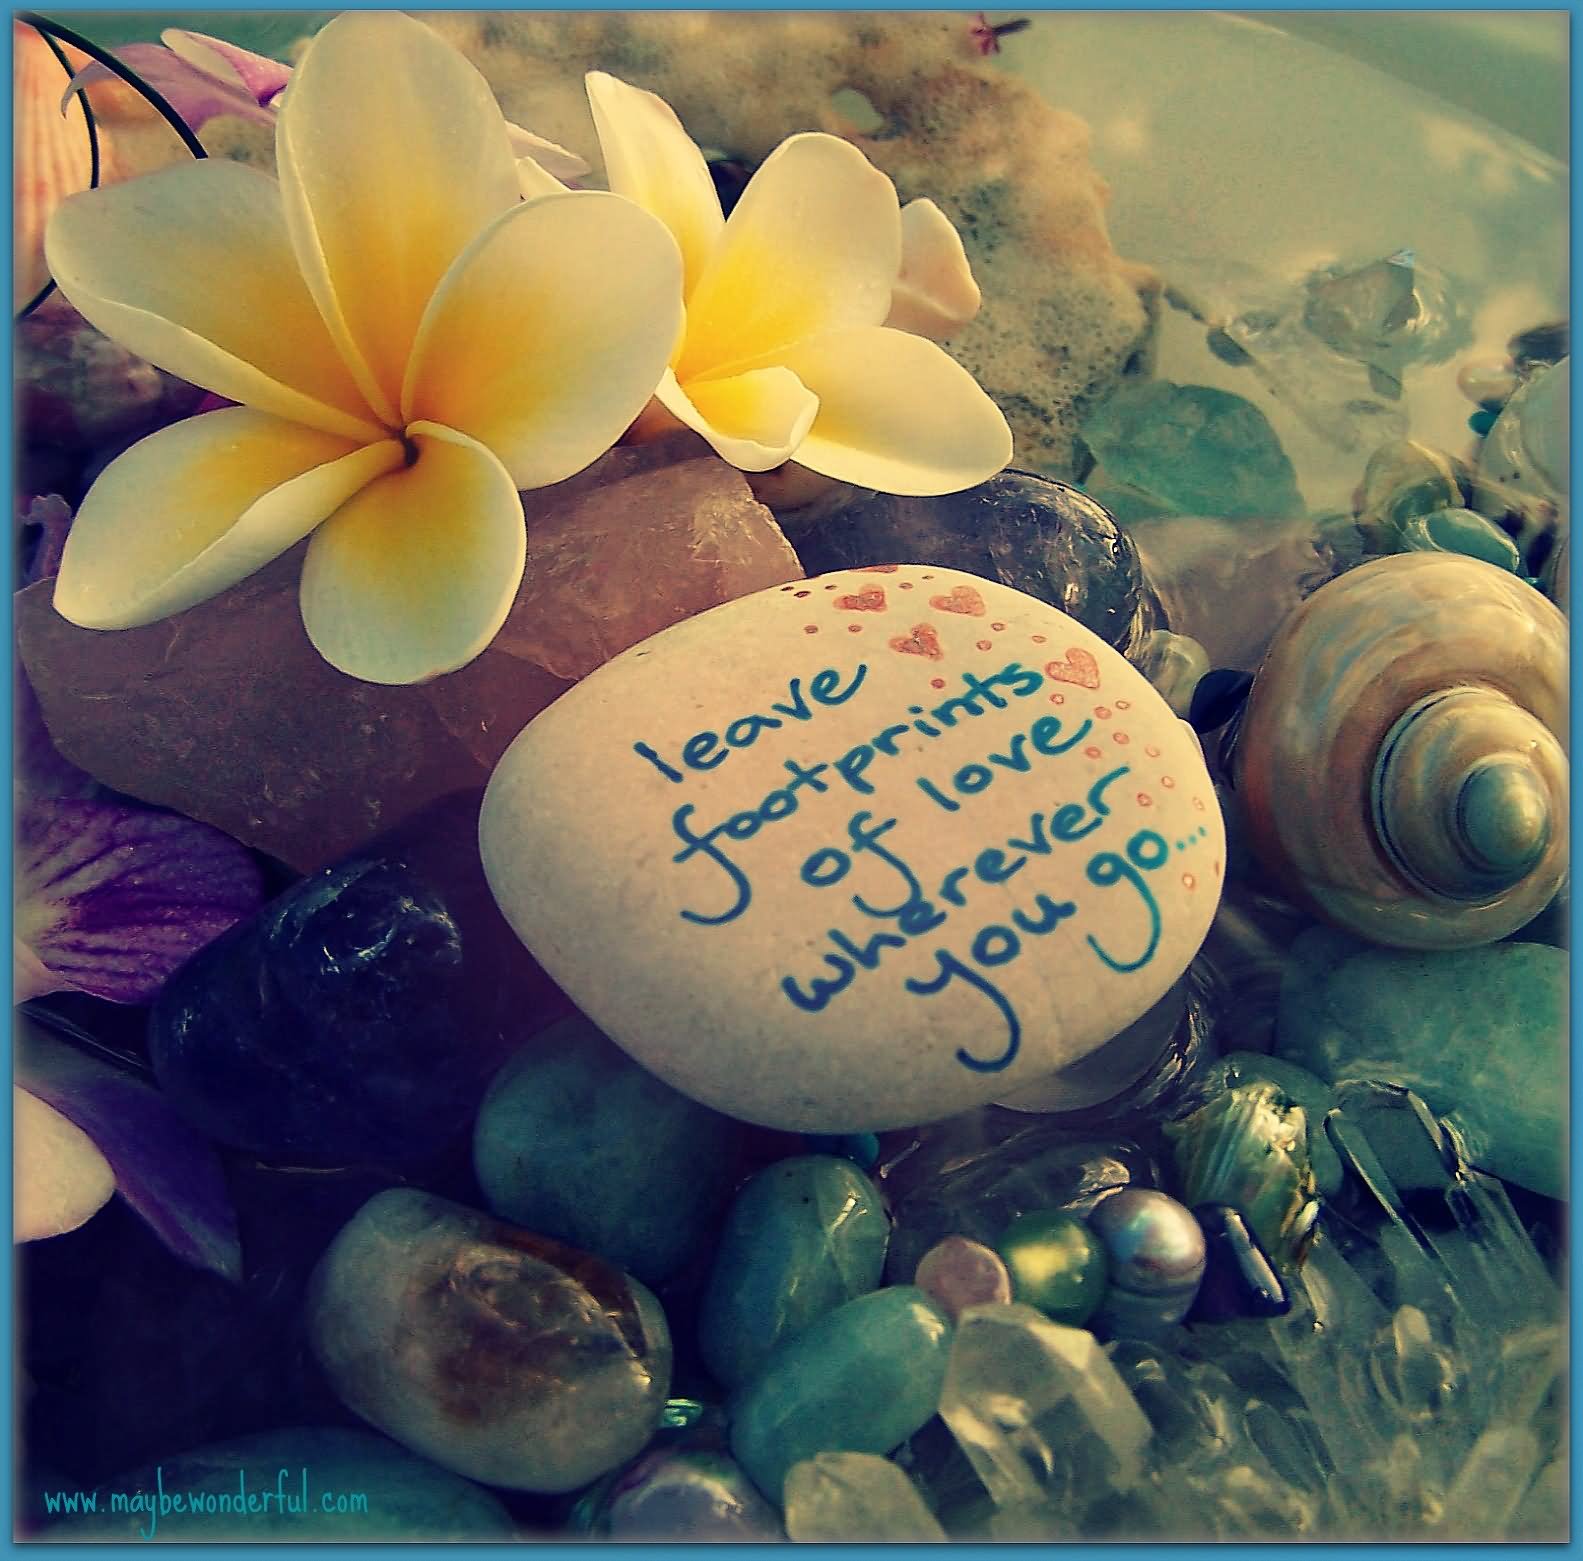 Leave footprints of love wherever you go - Love Quote (3)